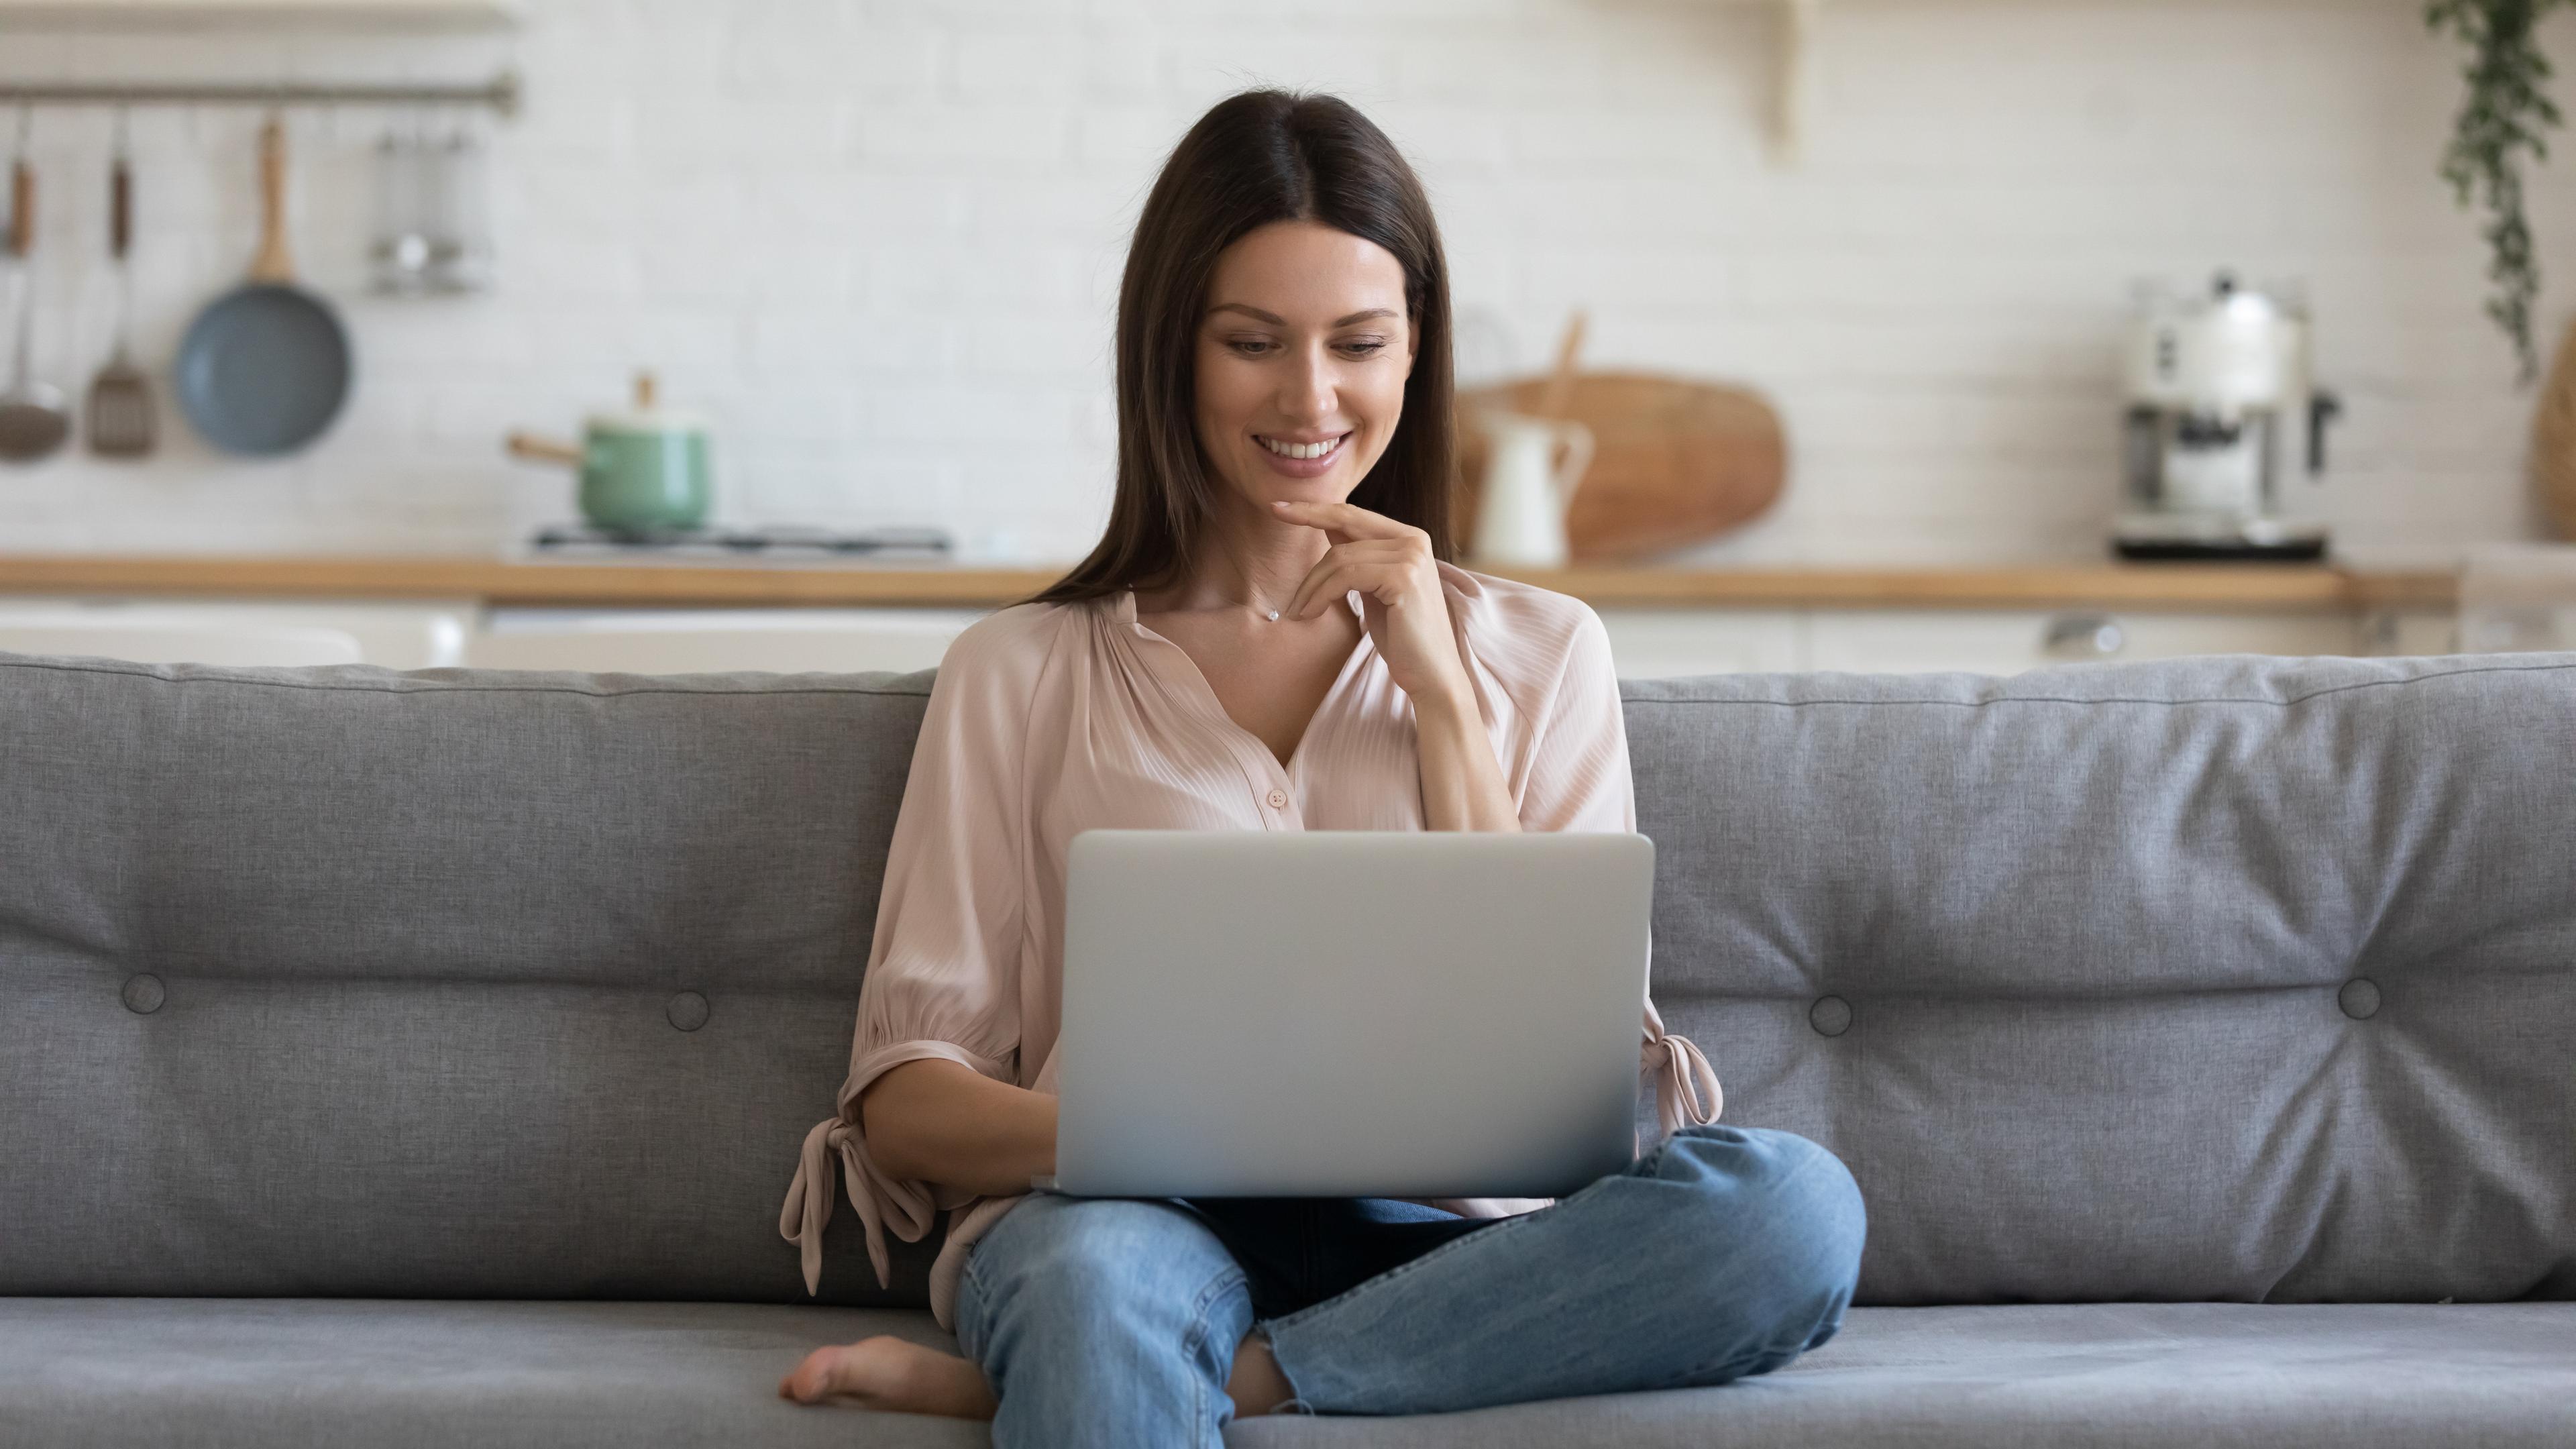 Lady with laptop smiling